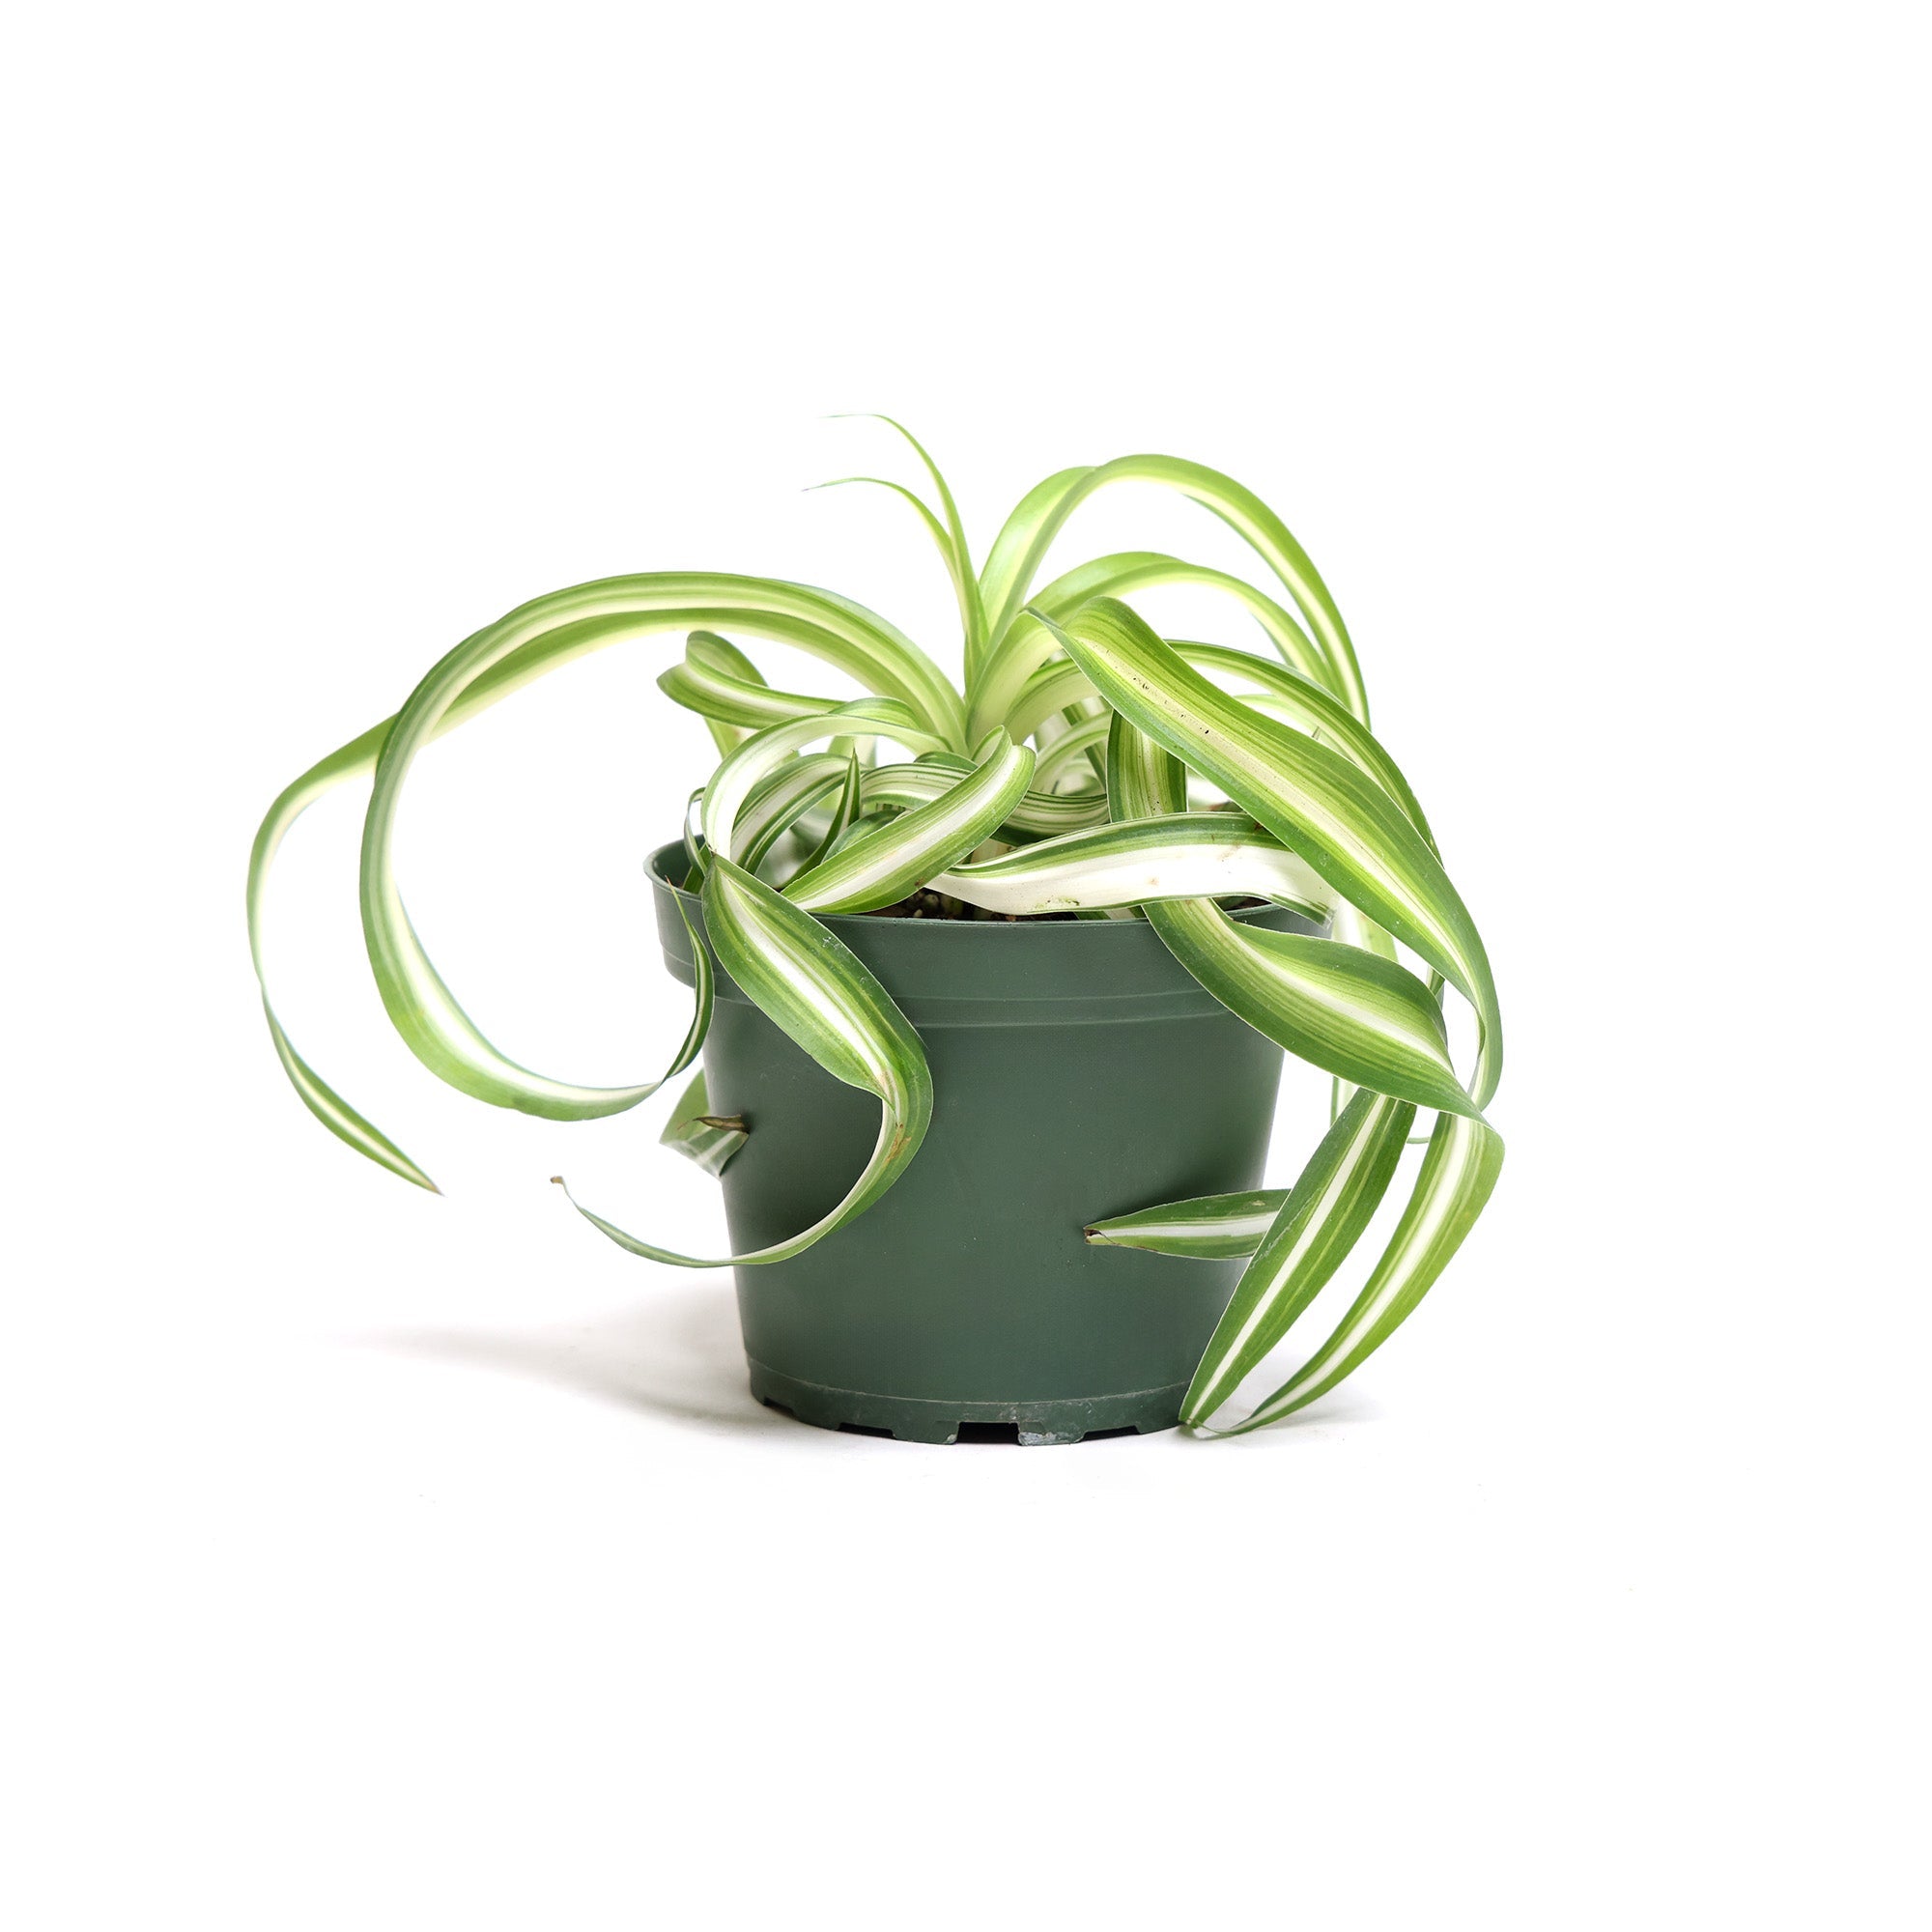 A green and white striped Chive Studio Spider Plant Bone 4 Inches in a dark green pot against a white background. The long, slender leaves arch gracefully outward.